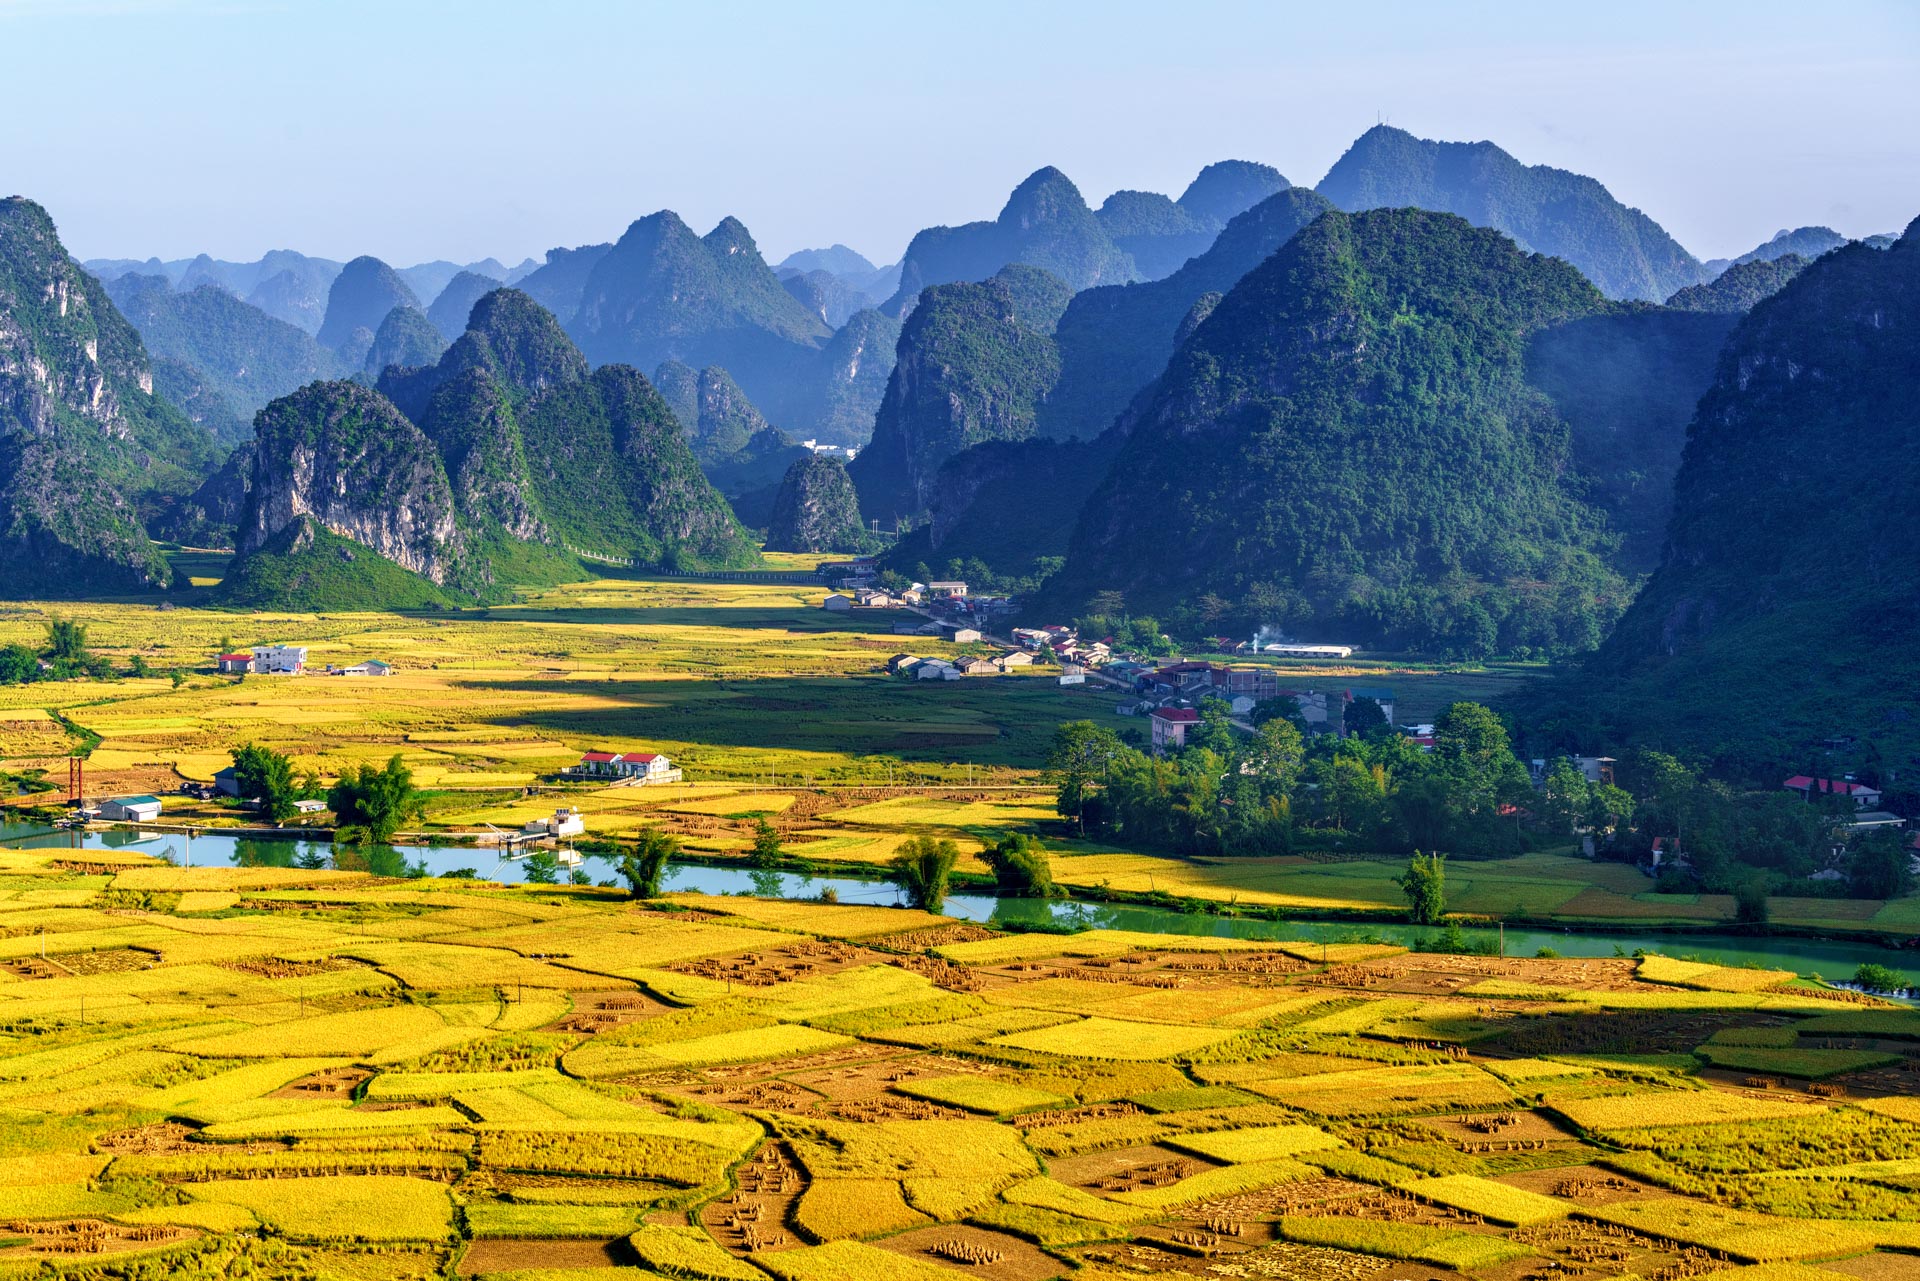 /fm/Files//Pictures/Ido Uploads/Asia/Vietnam/Cao Bang/Cao Bang - Rice Fields Trung Khanh Wide Landscape Mountain River - DS - SS.jpg